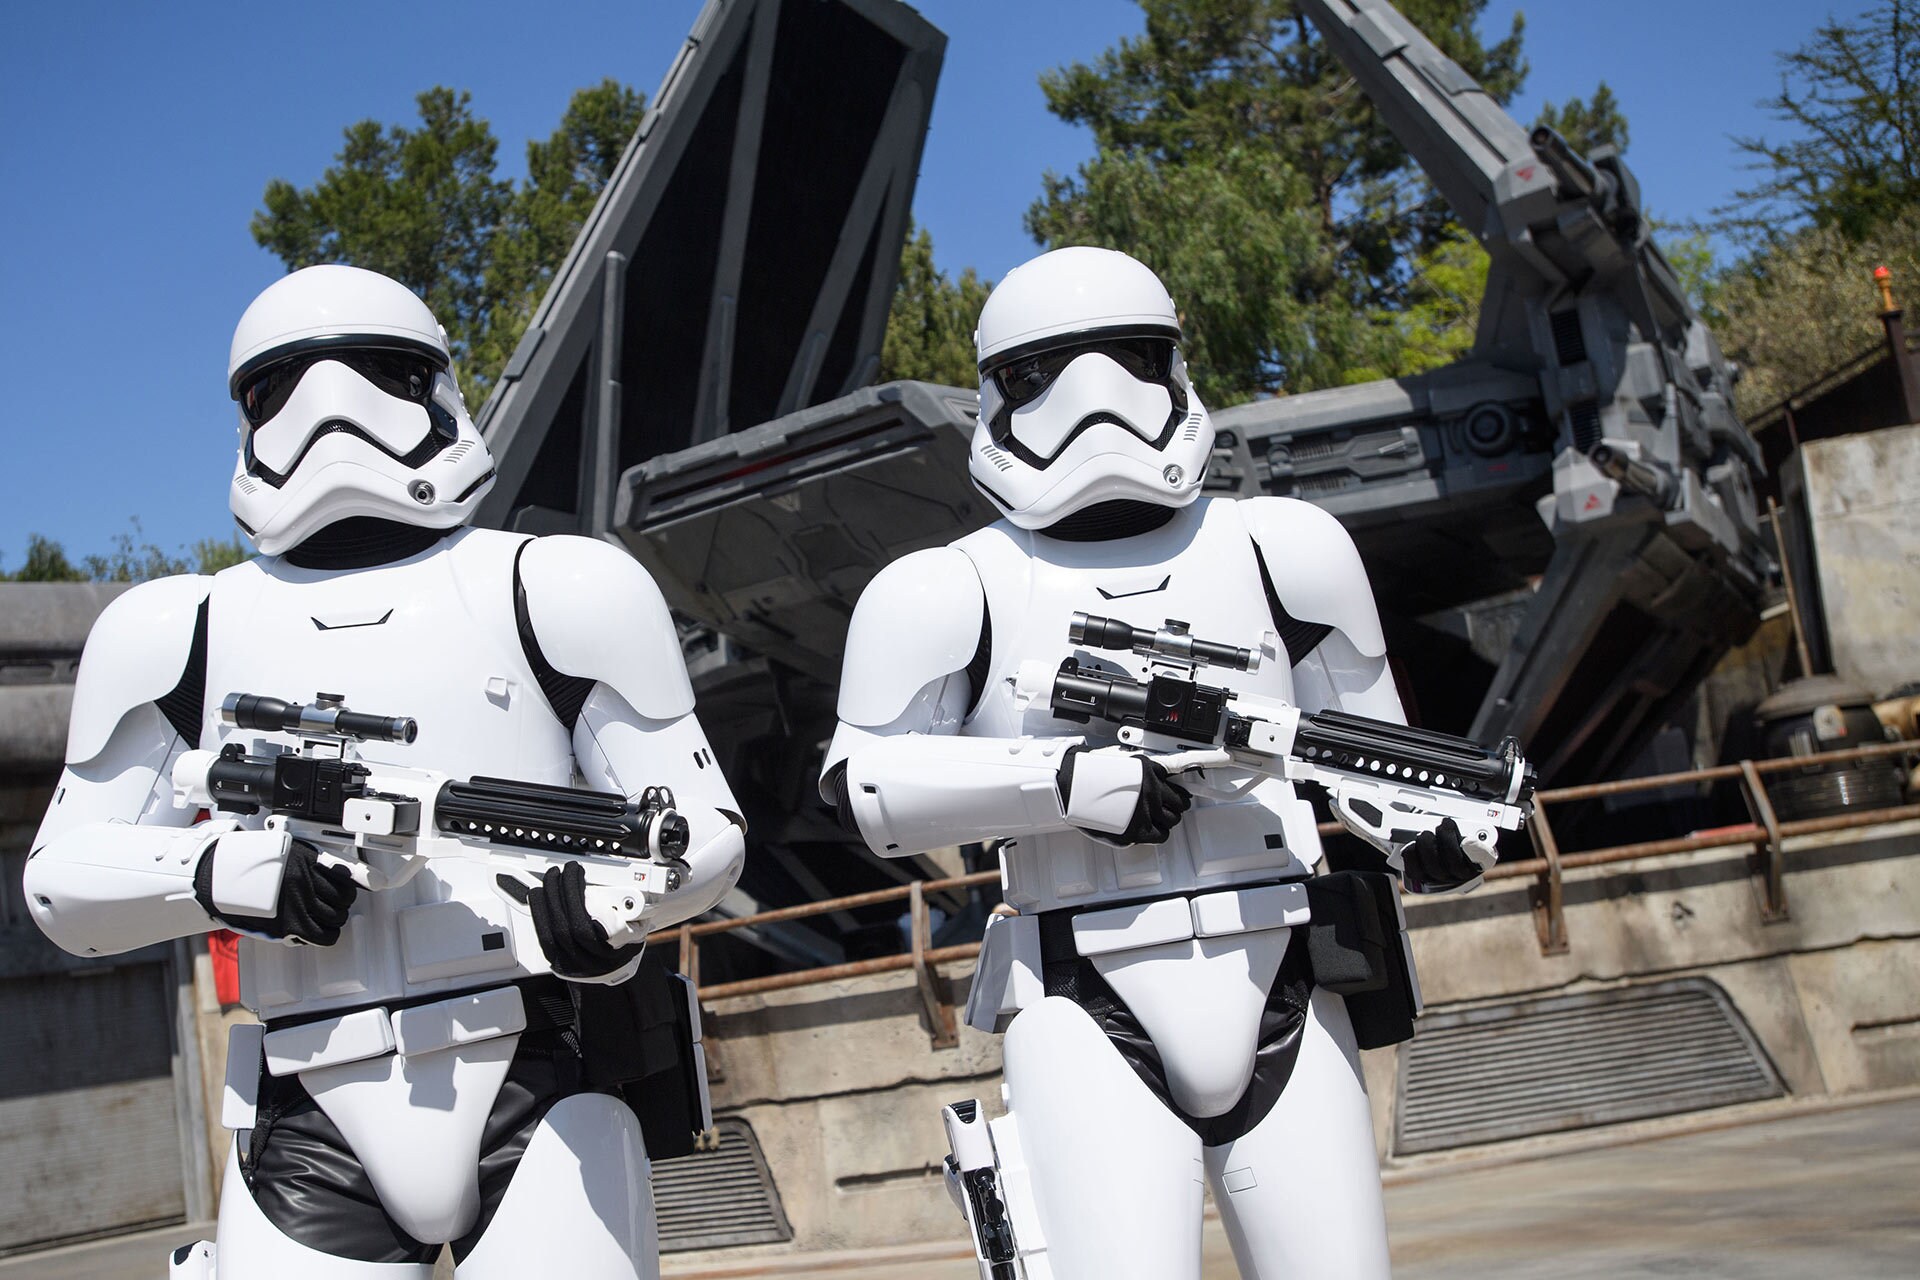 First Order stormtroopers patrol the grounds at Black Spire Outpost.